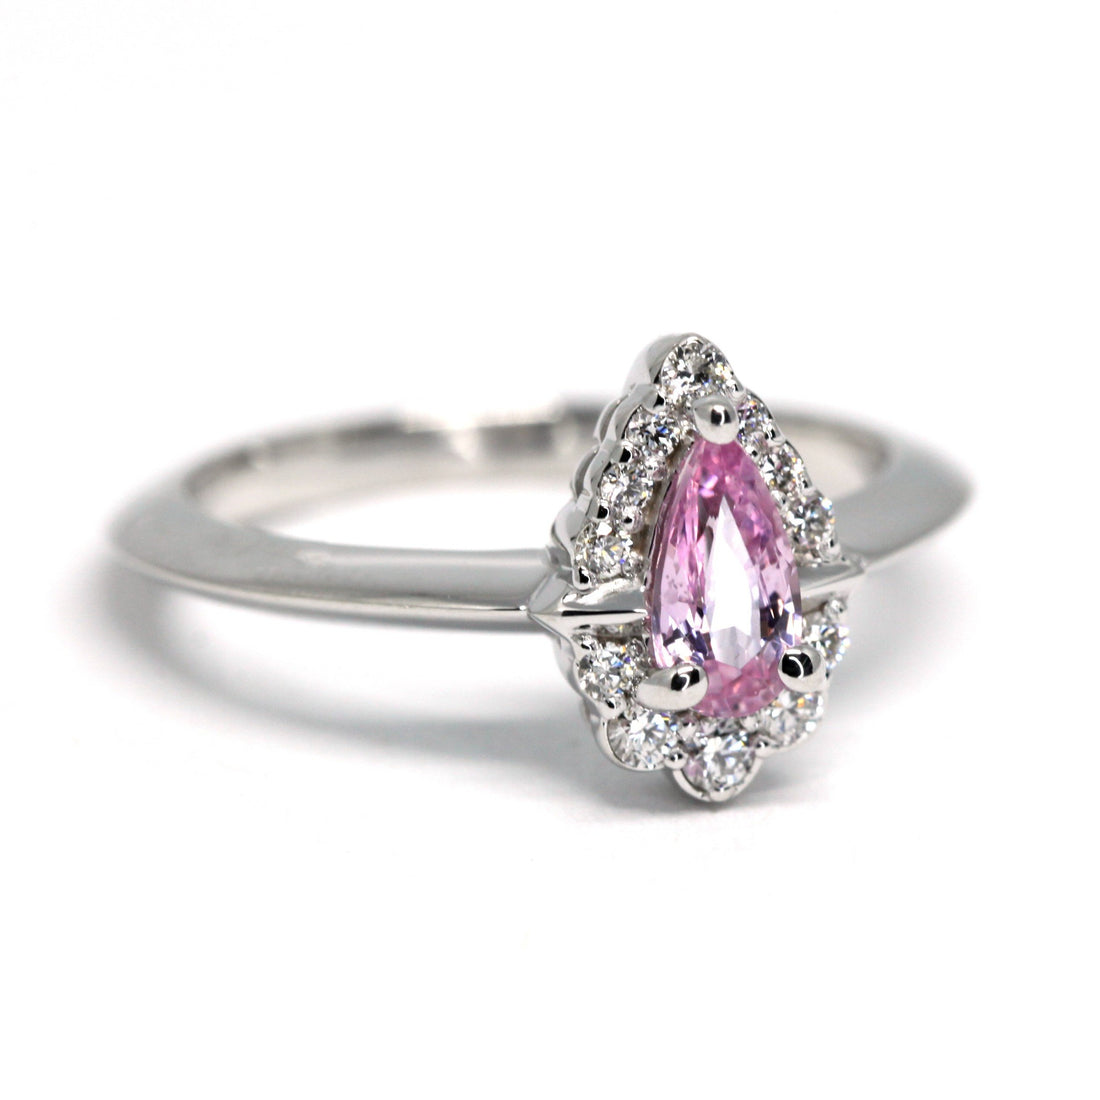 Side view of pink sapphire color gemstone bridal engagement ring bena jewelry handmade in montreal fine custom made color gemstone engagement ring montreal specialist color gemstone and diamond ring color gemstone cusotm made engagement ring montreal handmade in canada color gems ring designer